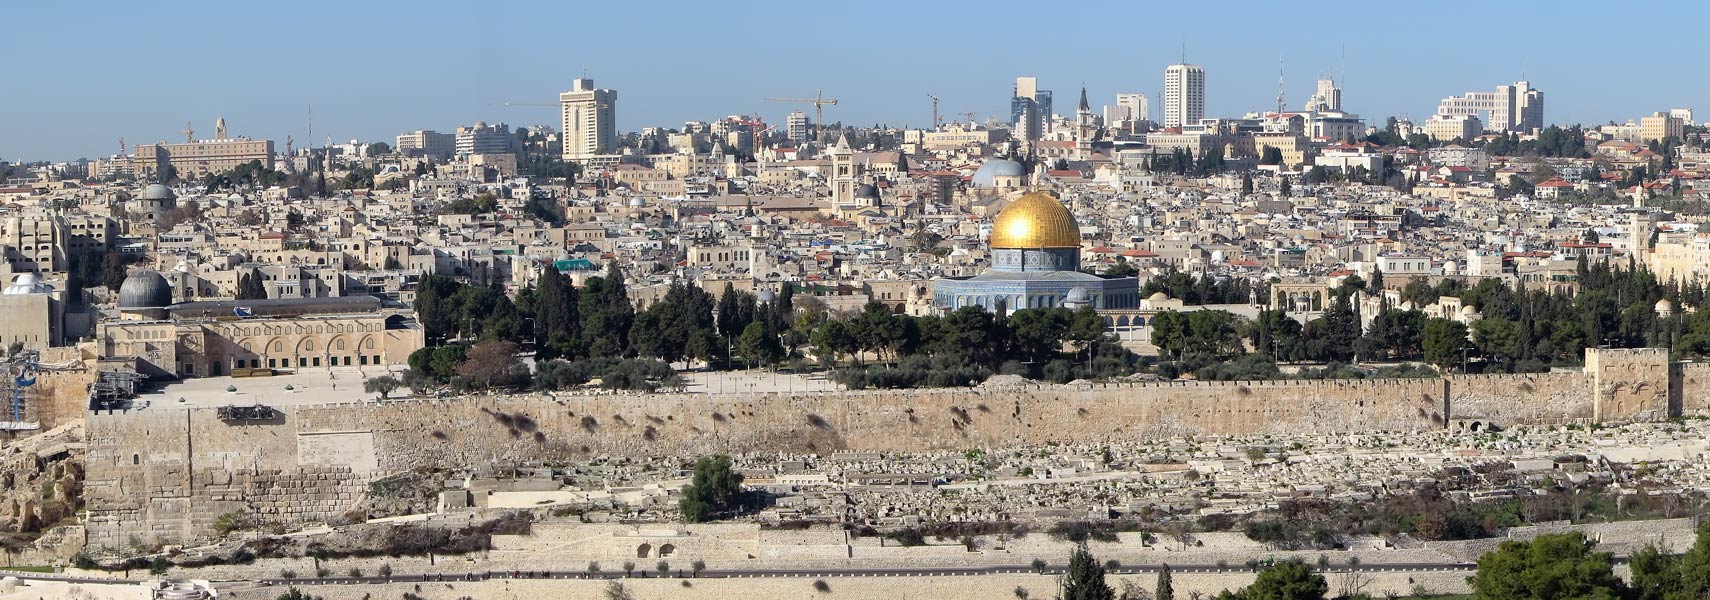 Panorama view of Jerusalem with the Temple Mount and the Dome of the Rock.